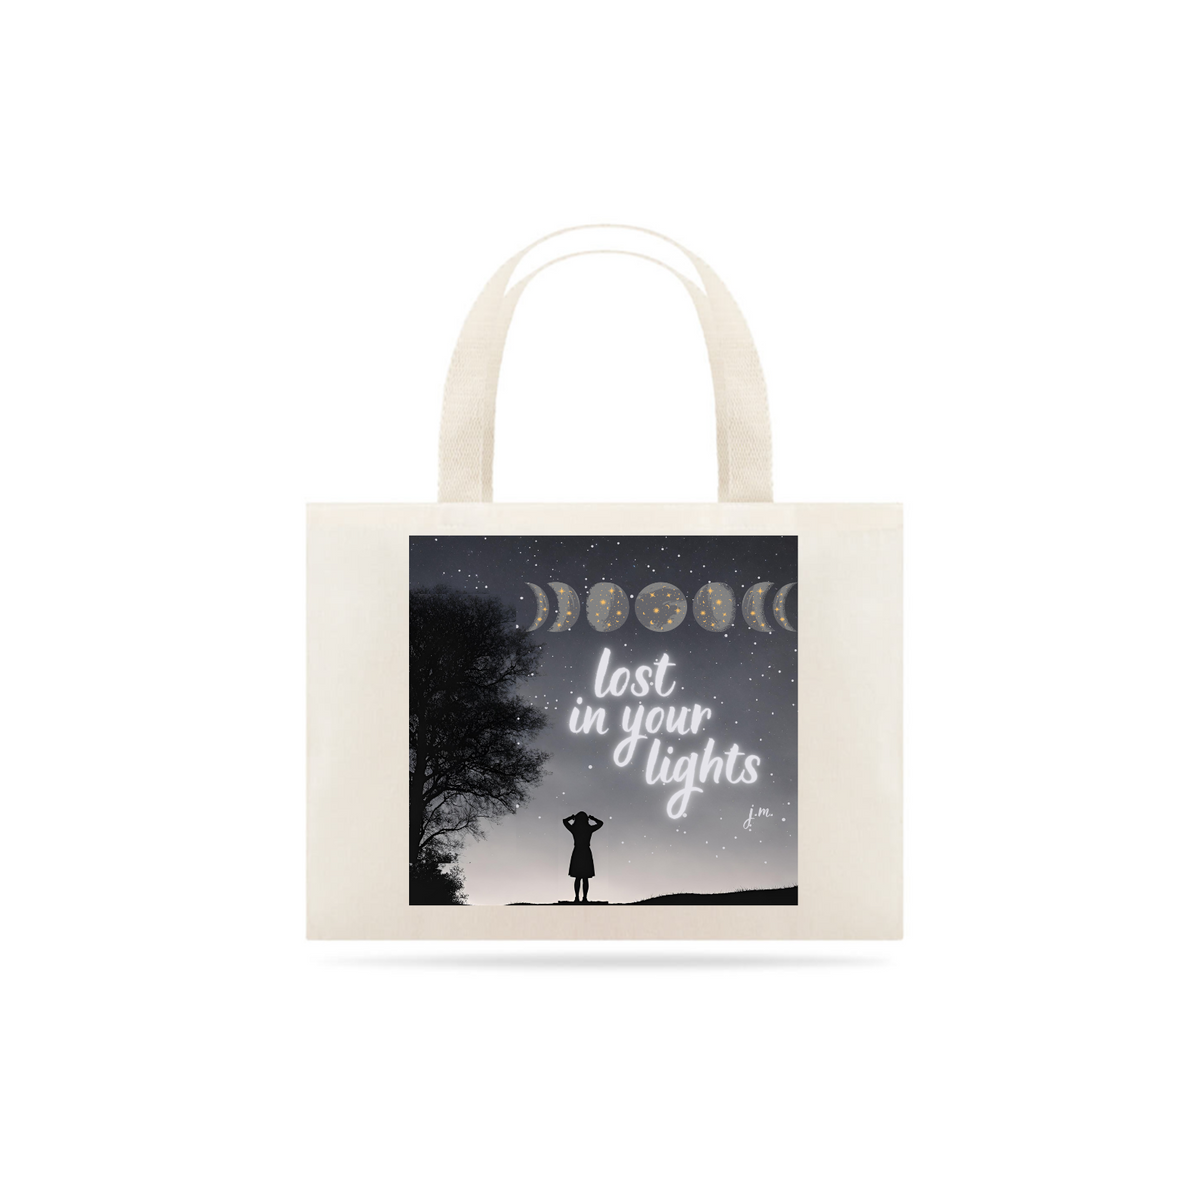 Nome do produto: Eco bag Lost in your lights